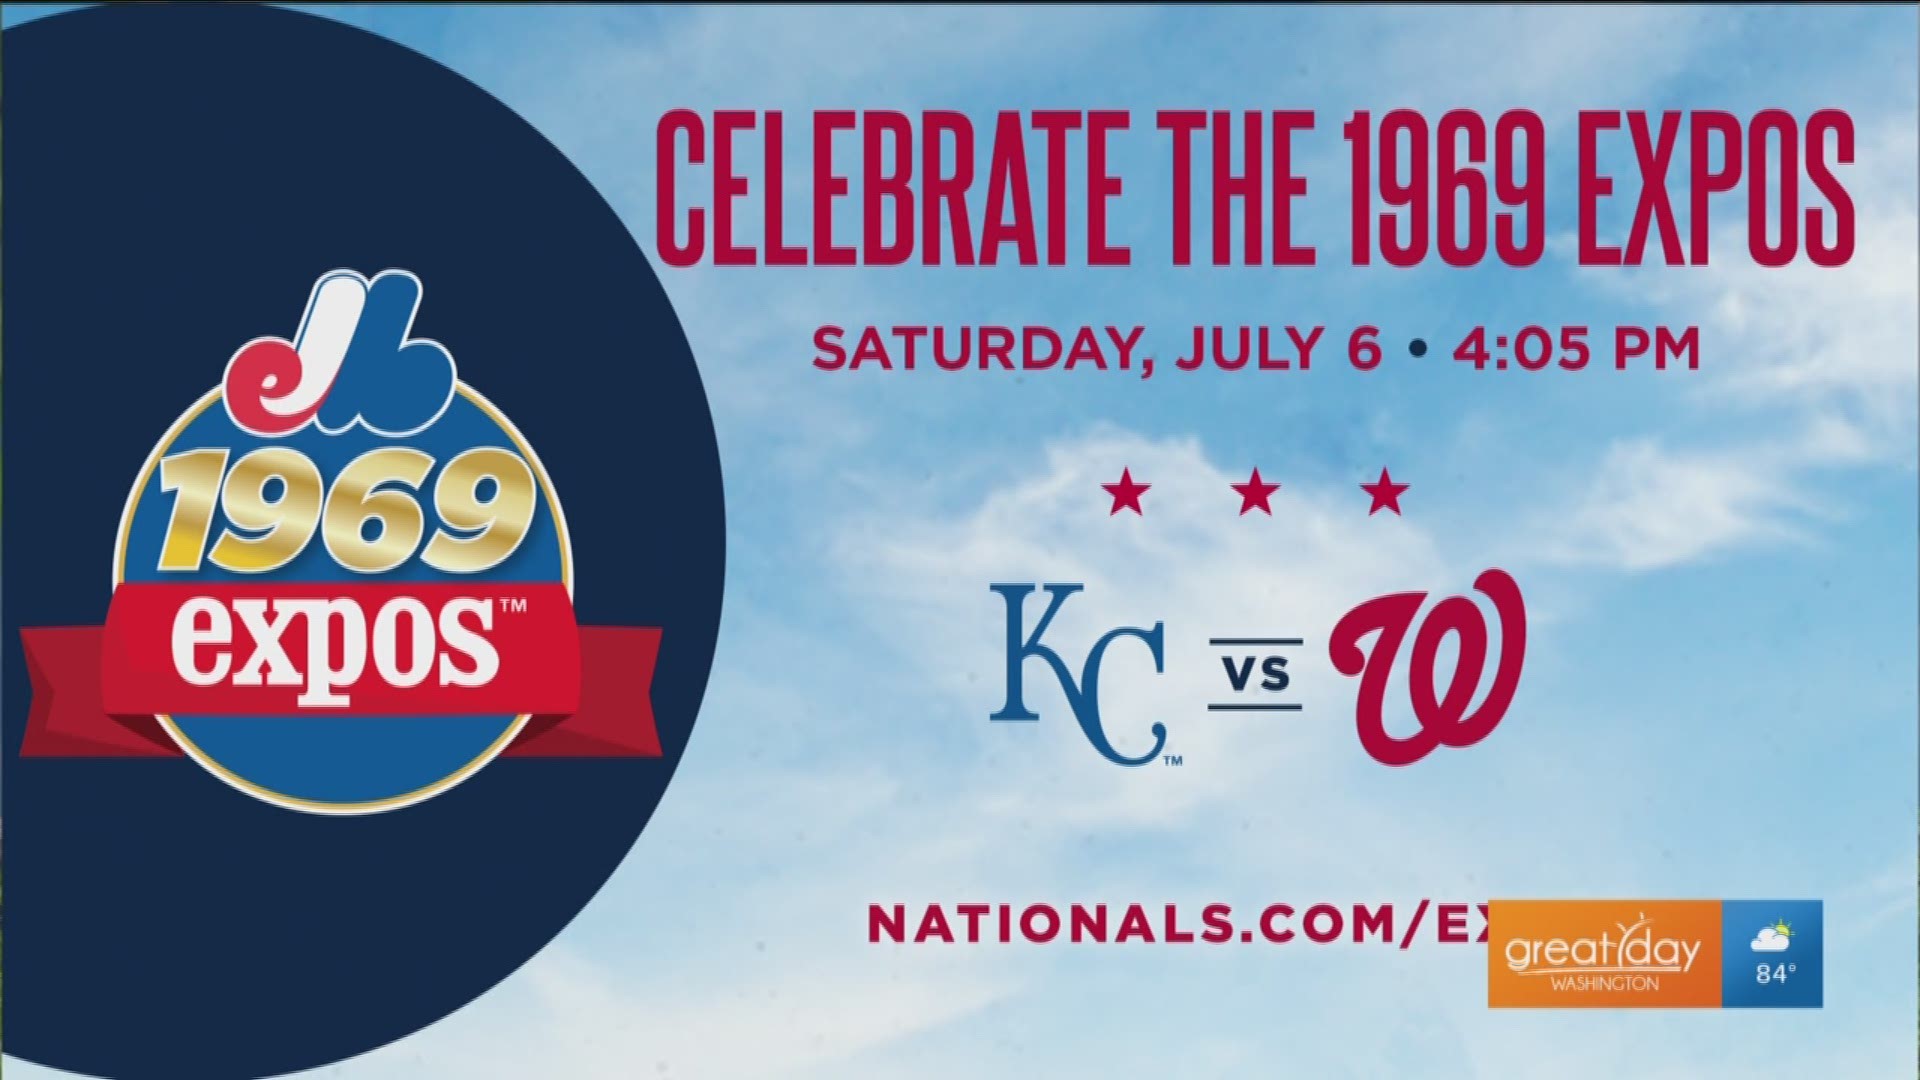 Go back in time for the Nats throwback night and other themed events